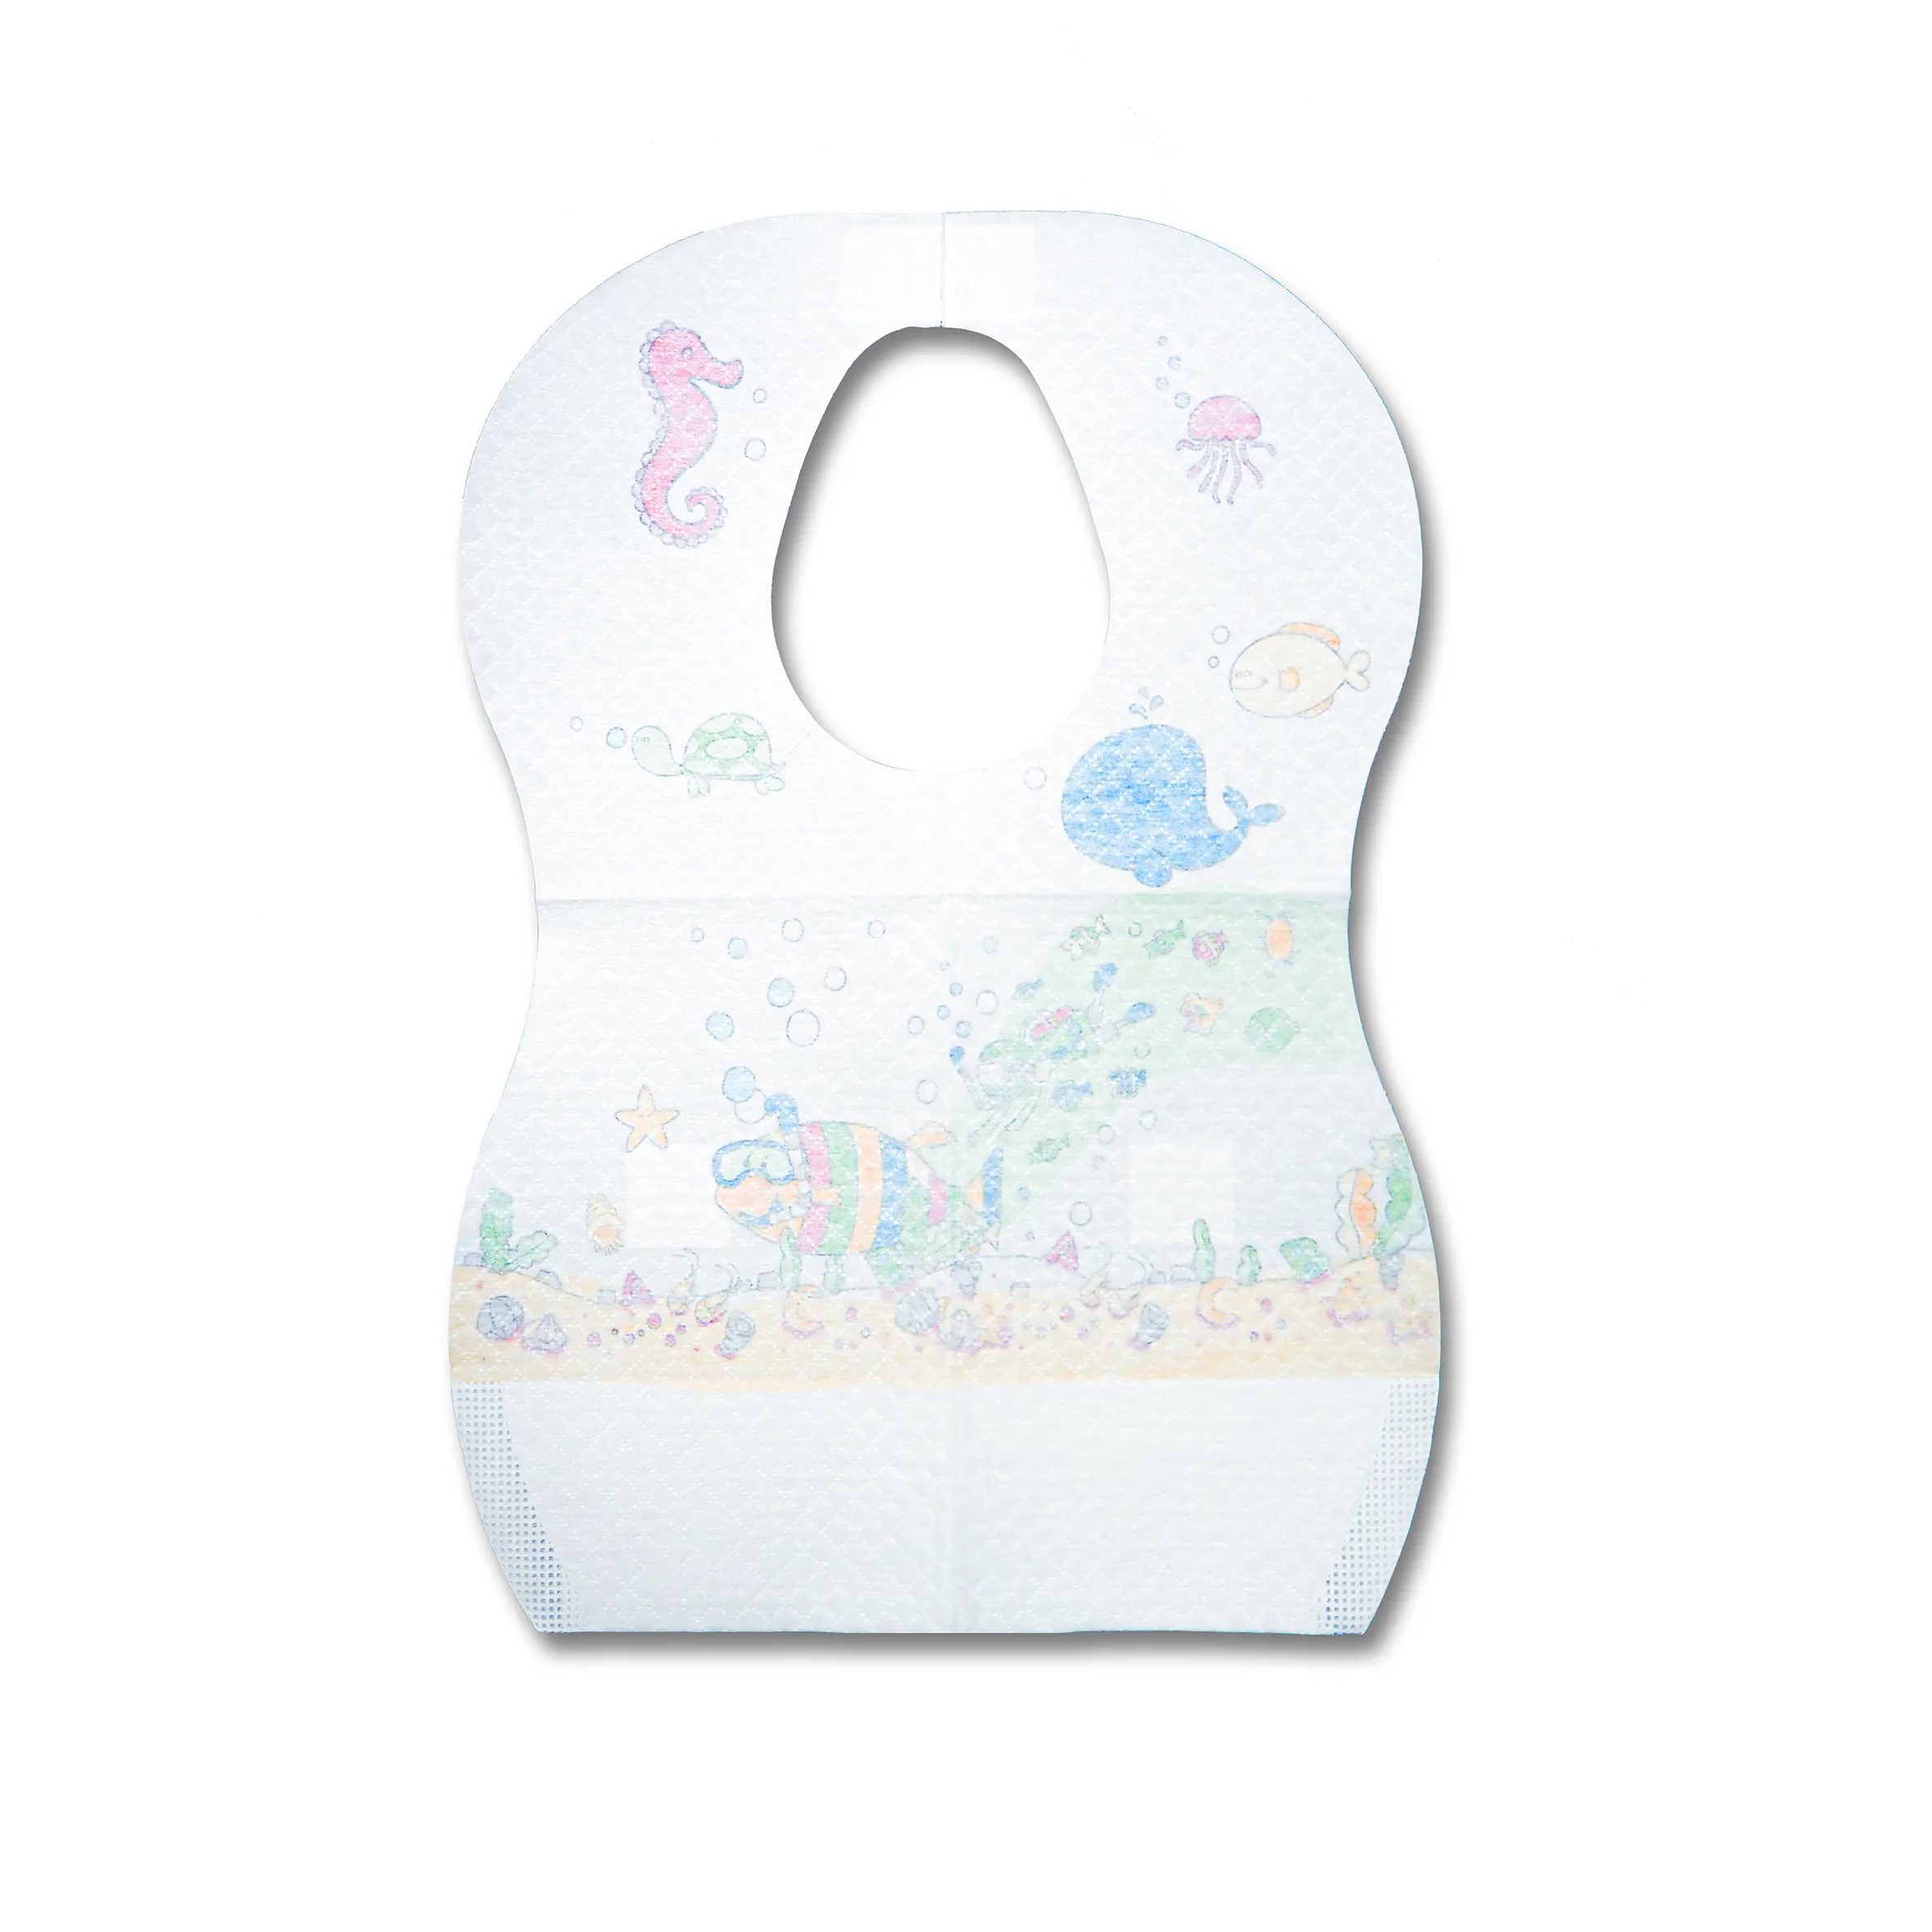 Easy to Use lovely pattern disposable baby bibs